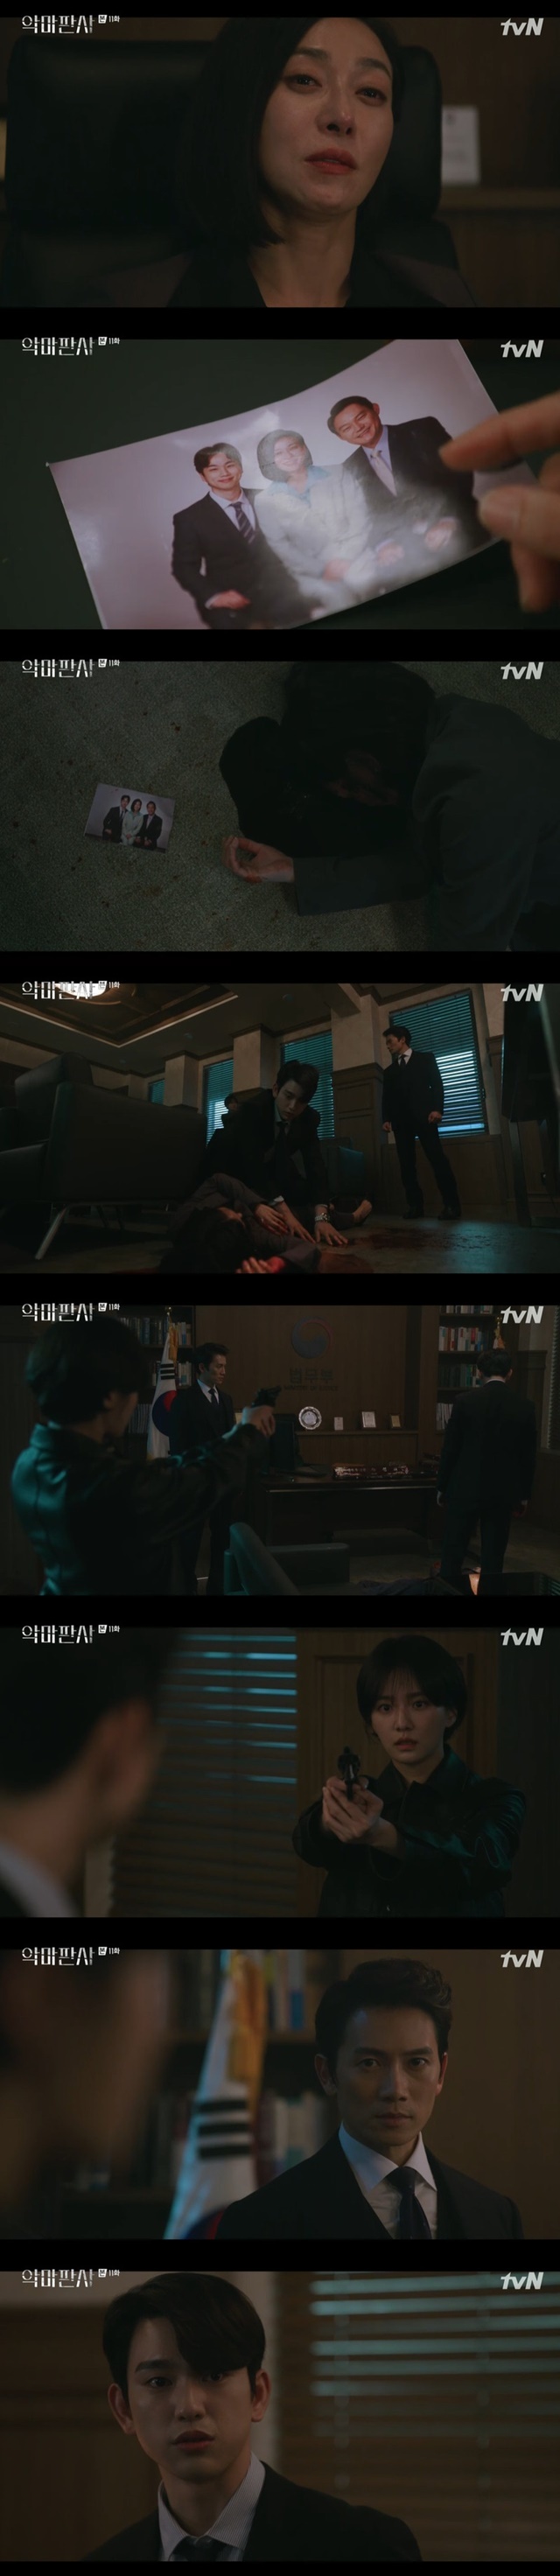 Jinyoung surprised Park Gyoo-yeong with his search for files even after the death of Young-nam Jang.In the 11th episode of TVNs Saturday drama The Devil Judge, which aired on August 7, Cha Kyung-hee (Young-nam Jang) was killed.Jung Sun-ah (Kim Min-jung) was surprised to learn that Kang (Ji-sung) handed my data to Cha Kyung-hee (Young-nam Jang).Cha Kyung-hee told Jung Sun-ah that the only witness to his mothers death was Jung Sun-ah, so he could manipulate the opposite doctors opinion that Jung Sun-ahs mother was not drunk at the time.What Cha Kyung-hee wanted was to catch John and restore my sons honor.Jung Sun-ah threatened John with a razor and asked, Why did you do that? I was in trouble because of my story. And John said, I need you.I have to catch Cha Kyung-hee, but I want you to do it. Then he invited Jung Sun-ah to his home, and Jung Sun-ah was in his old memories at his house.He also called his nanny (Yoon Hye-hee) to take the position and took the Jung Sun-ah.The nanny was surprised to recognize her maid Jung Sun-ah in the past, and Jung Sun-ah was embarrassed.When Jung Sun-ah said, Are you playing with me now? he said, I think its fun to play with you. You suggested it first.Were going to the top of the world.Jung Sun-ah said, Its a joke, but I dont think Im going to hide it. Strange? Id like to be fooled. Just for a second.Meanwhile, Park Doo-man, a social responsibility foundation, approached Oh Jin-joo (played by Kim Jae-kyung), a trial judge, separately. Oh Jin-ju showed interest in the position that Judge John went through.Jung Sun-ah informed Cha Kyung-hee that Whistle Blower, who first reported the assault of son Lee Young-min (Moon Dong-hyuk), was a fake bought by Kang, and advised him to push him on live broadcasts without any time for Kang to respond.However, the Whistle Blower changed the words Cha Kyung Hee lied on the live broadcast, and Cha Kyung Hee was in a corner.Here, Kang fought back with Doyoungchun (played by Jung Eun-pyo), a multi-level fraudster that Cha Kyung-hee had taken away.Doyoungchun gave Cha Kyung-hee a large sum of money and said that another person was serving his time instead.For Cha Kyung-hee, who was so in a corner, John demanded corruption documents from the Social Responsibility Foundation people collected by Cha Kyung-hee.Cha Kyung-hee visited President Huh Jung-se (Baek Hyun-jin) and asked him to stop everything by going to Blackmail – Cinémix Par Chloé – to hand over the corruption document to John.However, Huh Jung-se confronted Cha Kyung-hees son Lee Young-min as a drug addict.When John and Jinyoung came to visit from a situation where they could not do this or that, Cha asked for time to smoke alone.